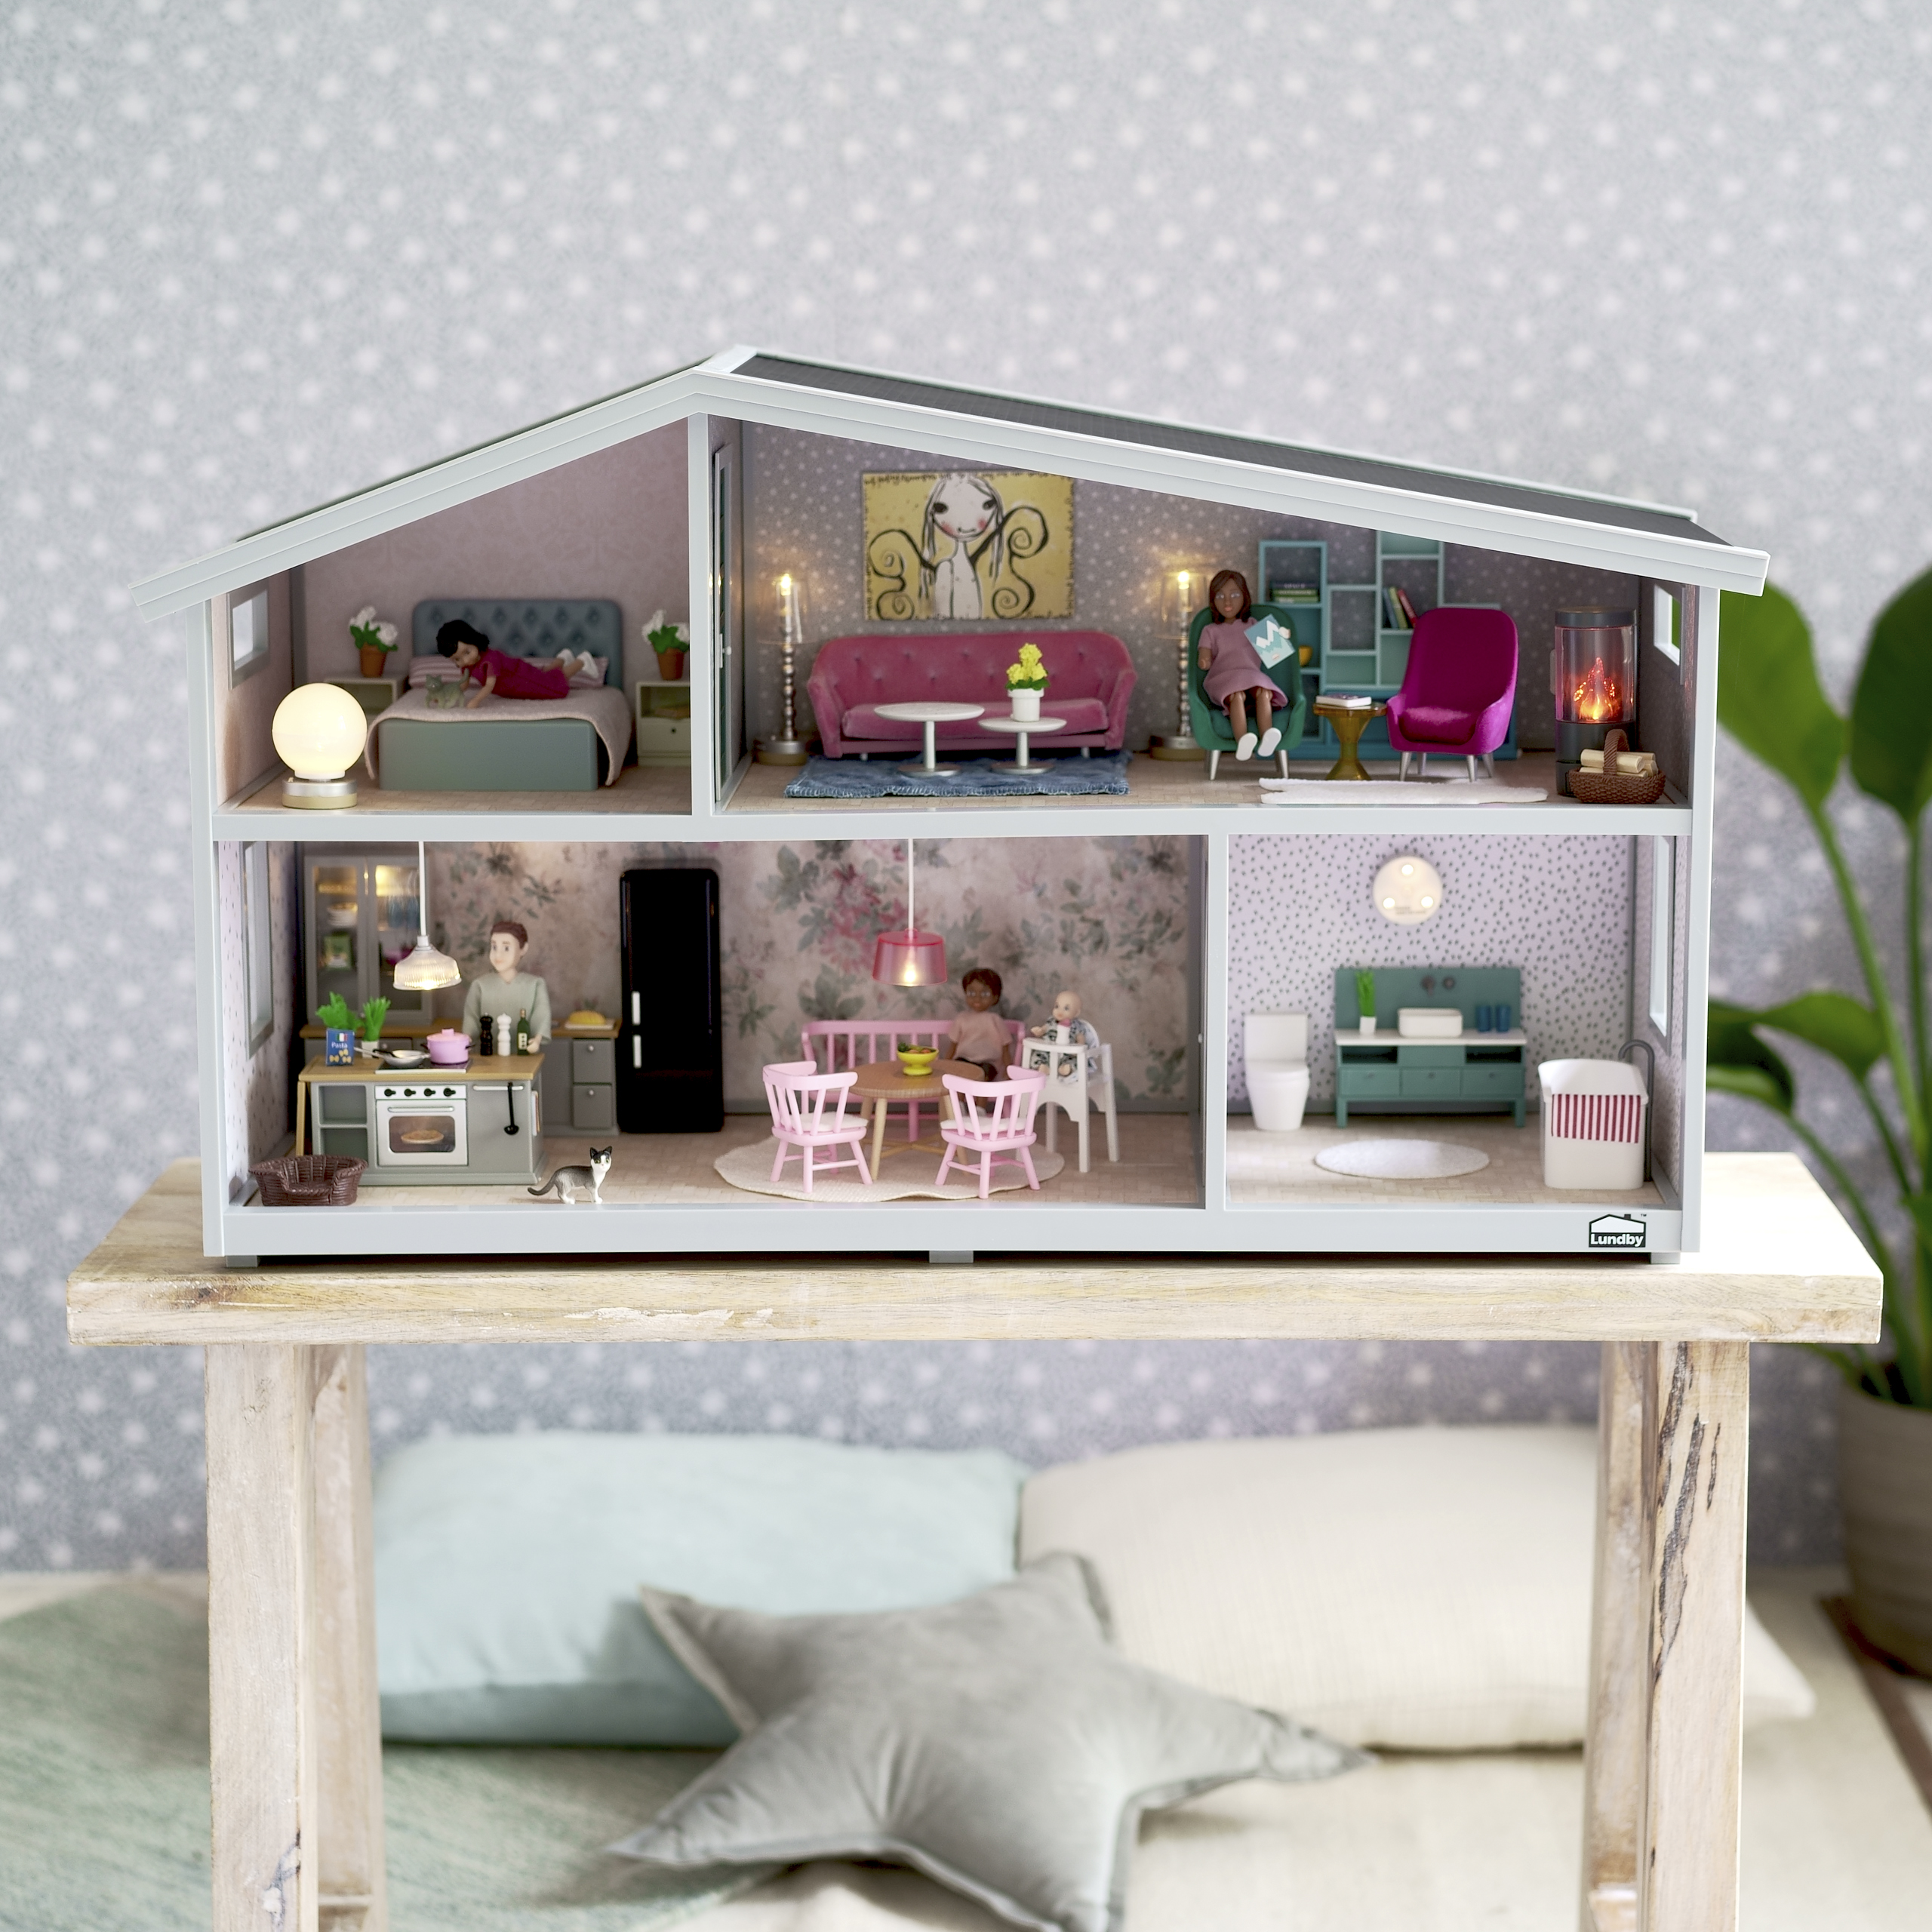 Lundby lundby doll house 4 rooms